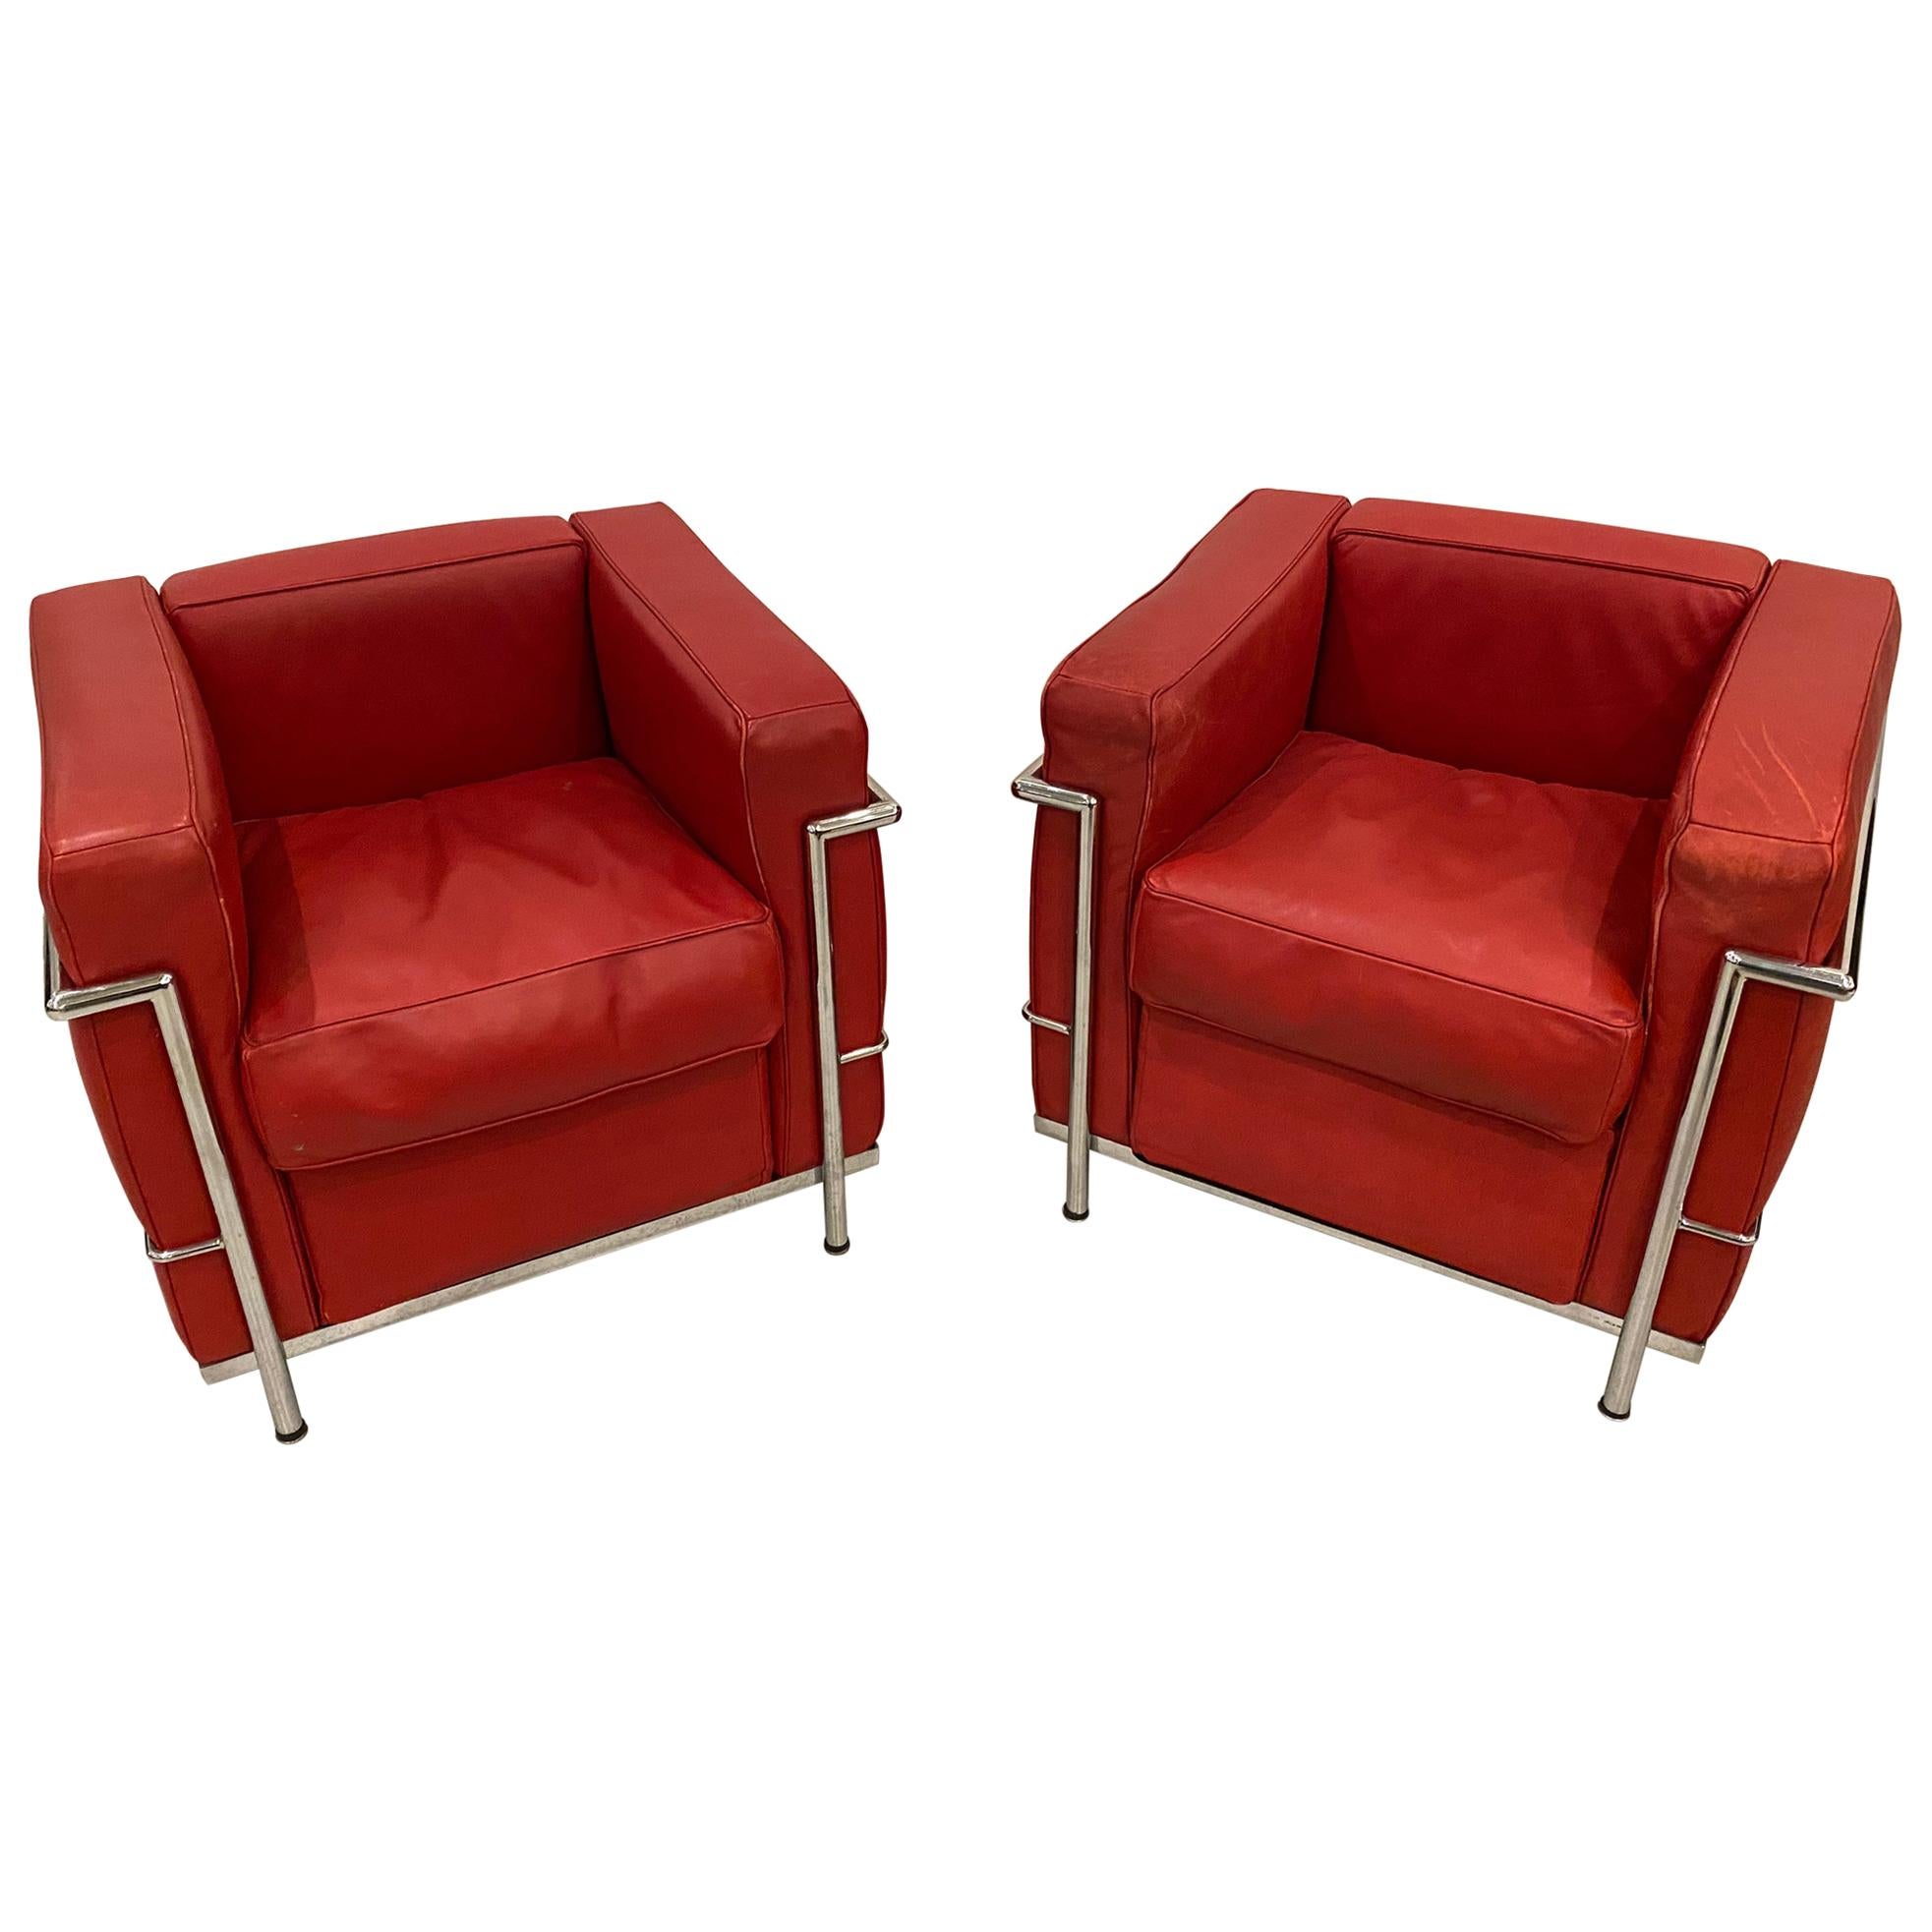 Pair of Chrome and Red Leather Club Chairs in the Style of Le Corbusier